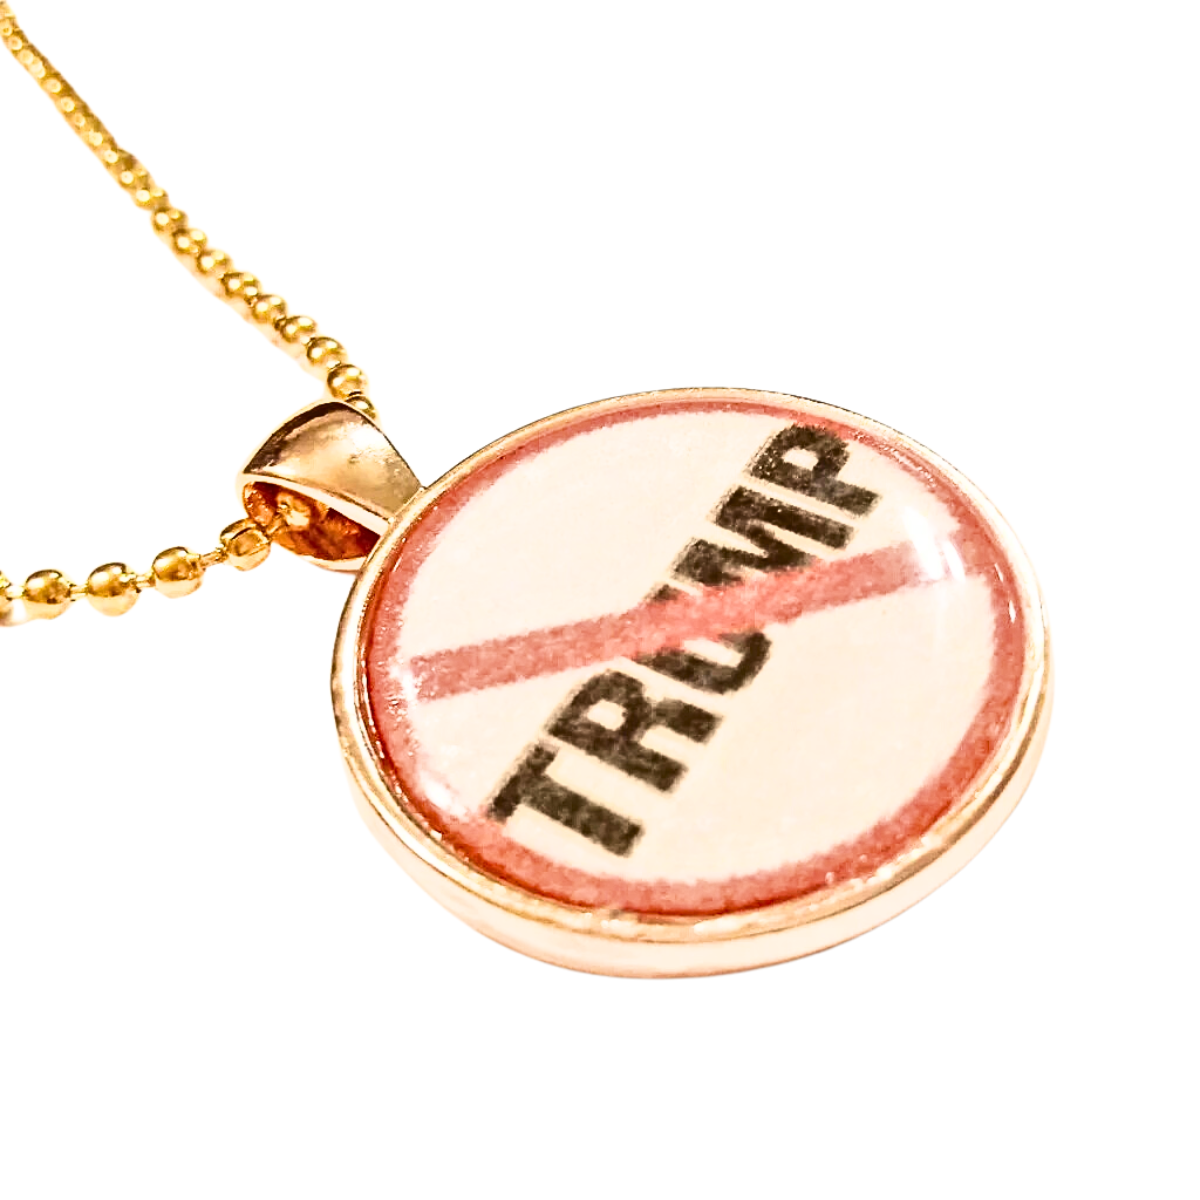 VOTE Peaceful Protest Necklace